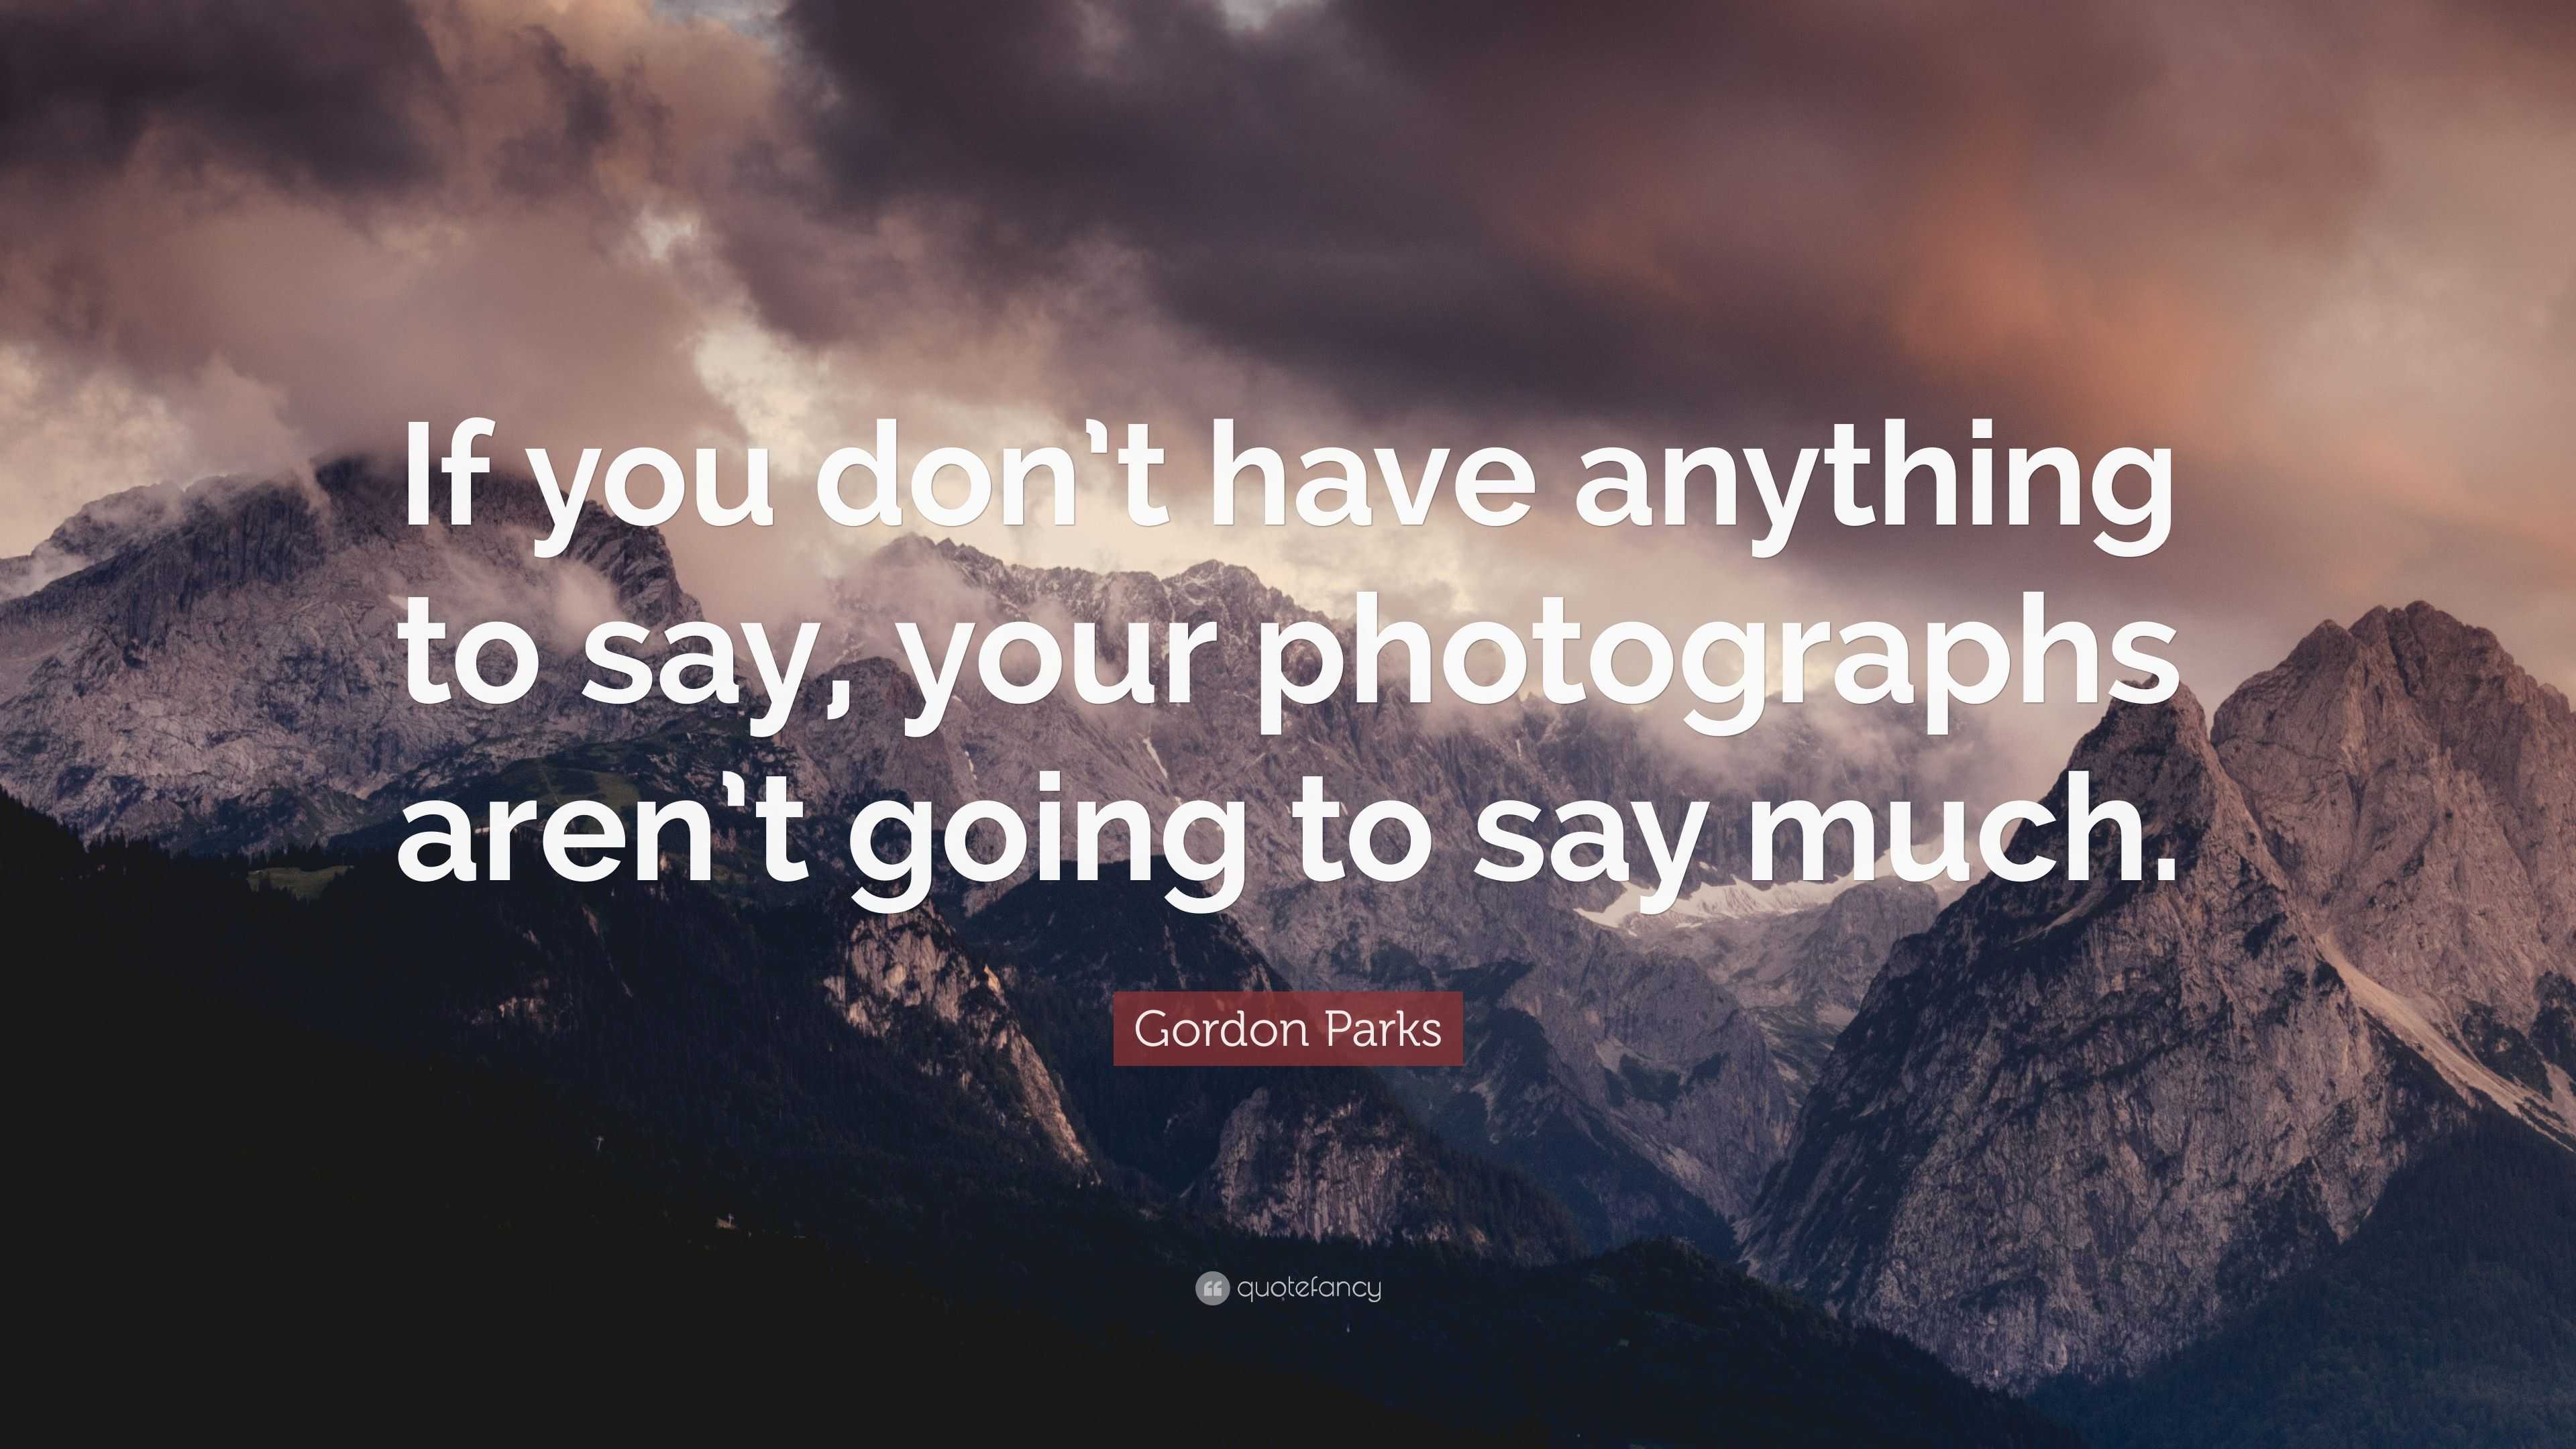 Gordon Parks Quote: “If you don’t have anything to say, your ...